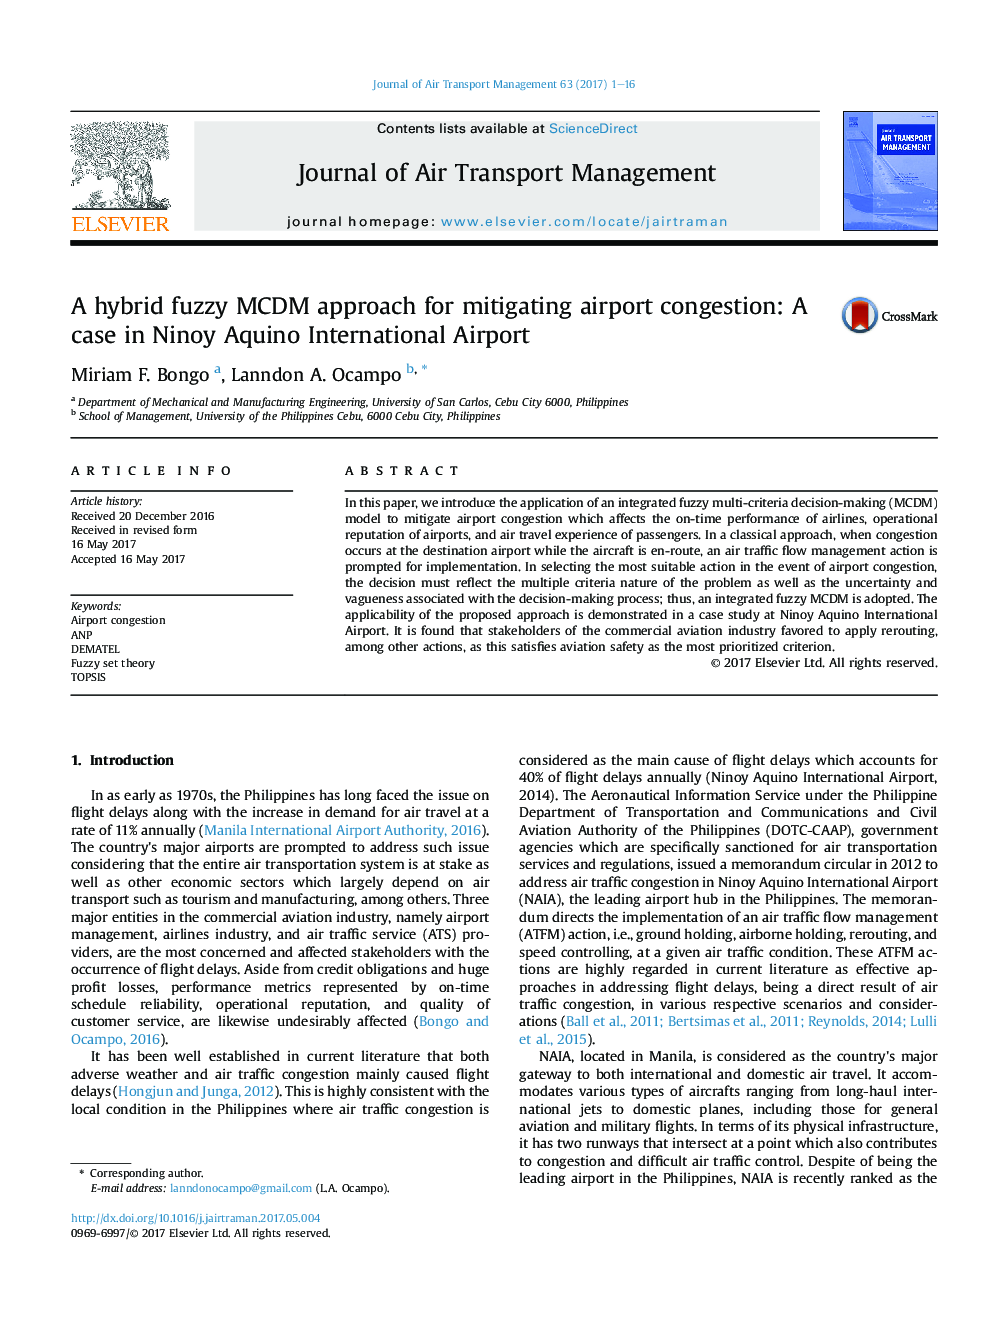 A hybrid fuzzy MCDM approach for mitigating airport congestion: A case in Ninoy Aquino International Airport